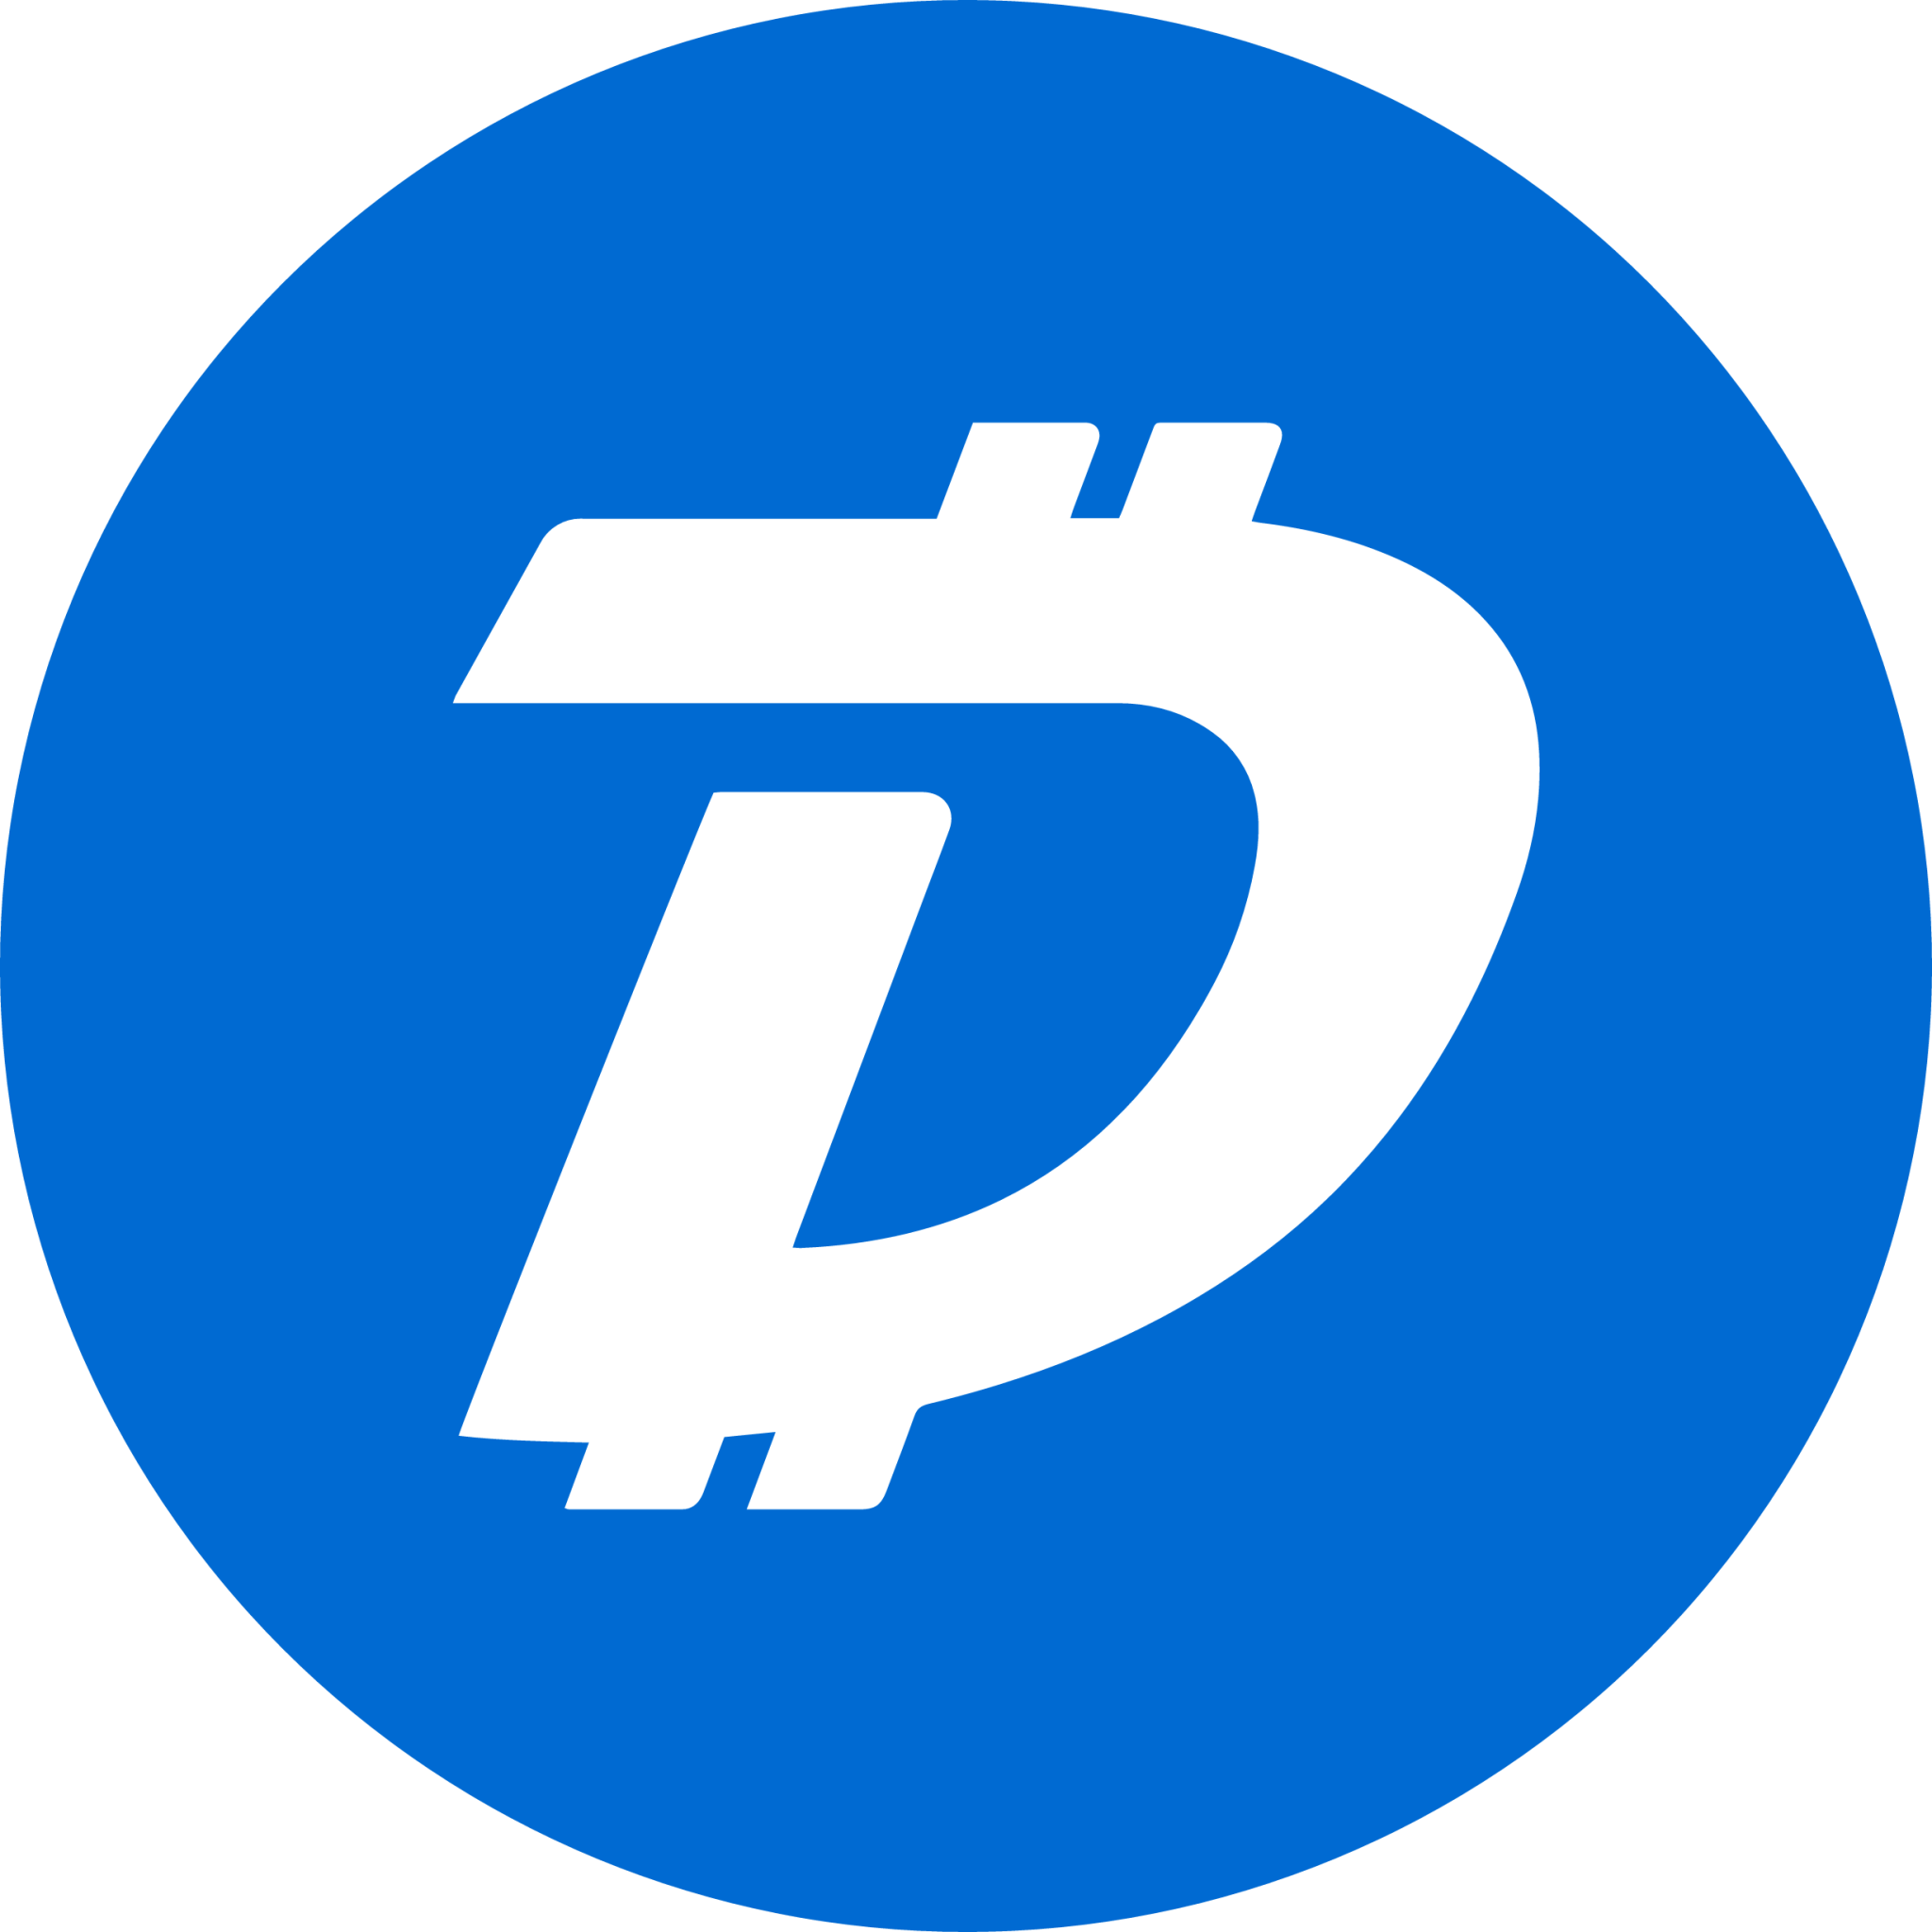 DigiByte Cryptocurrency icon